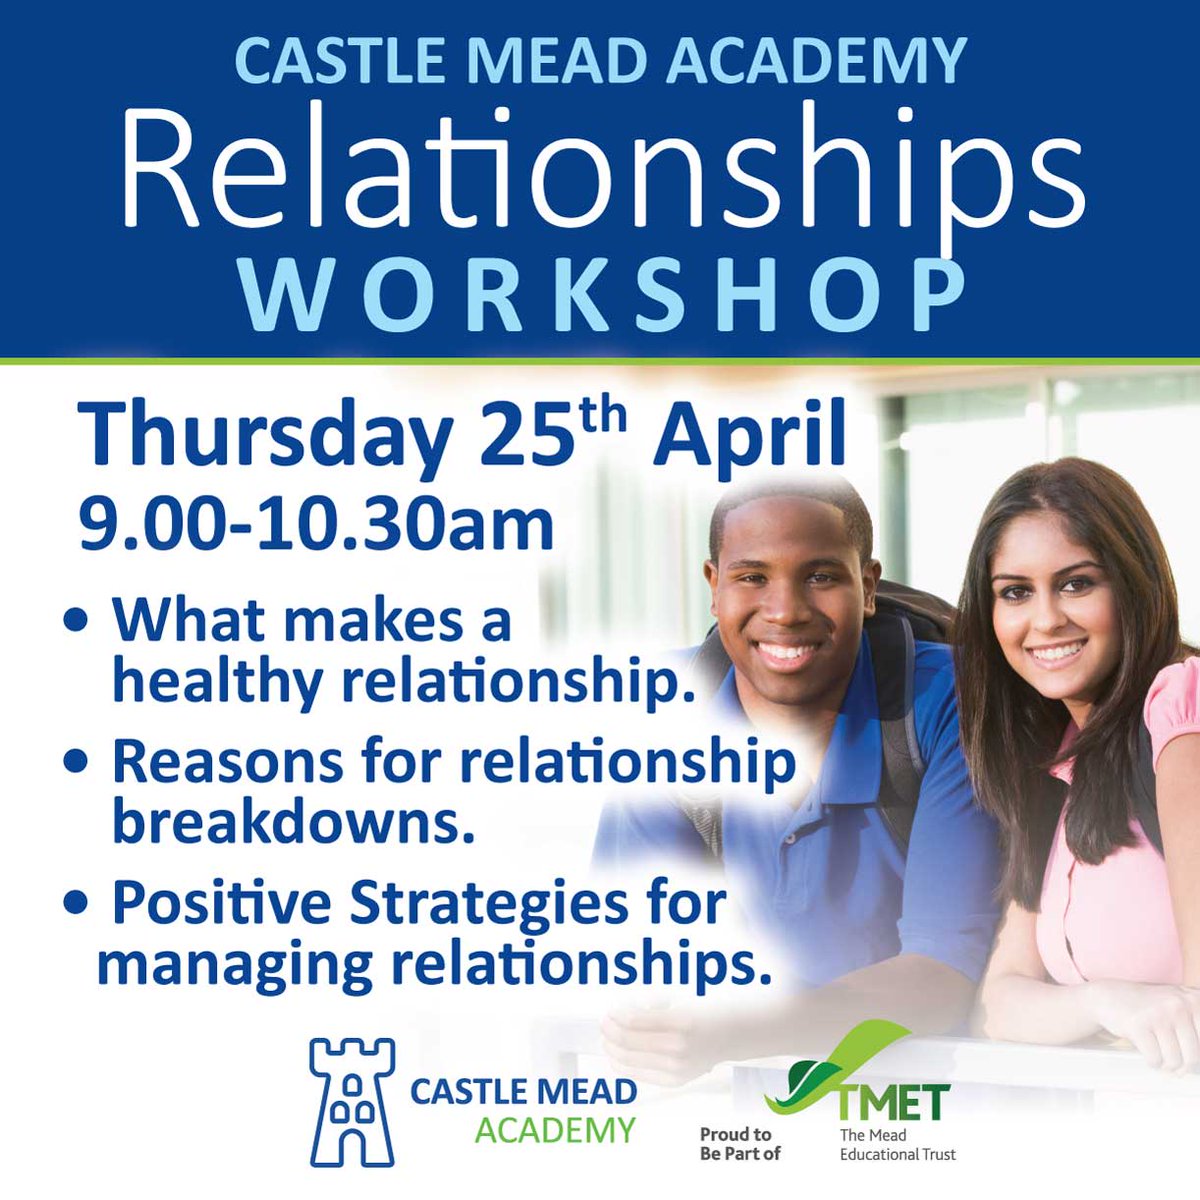 Join us for our Relationships Workshop! Where we will discuss: 🩷 What makes a healthy relationship. 🩷 Reasons for relationship breakdowns. 🩷 Positive strategies for managing relationships. See email for further details and to sign up for the event.